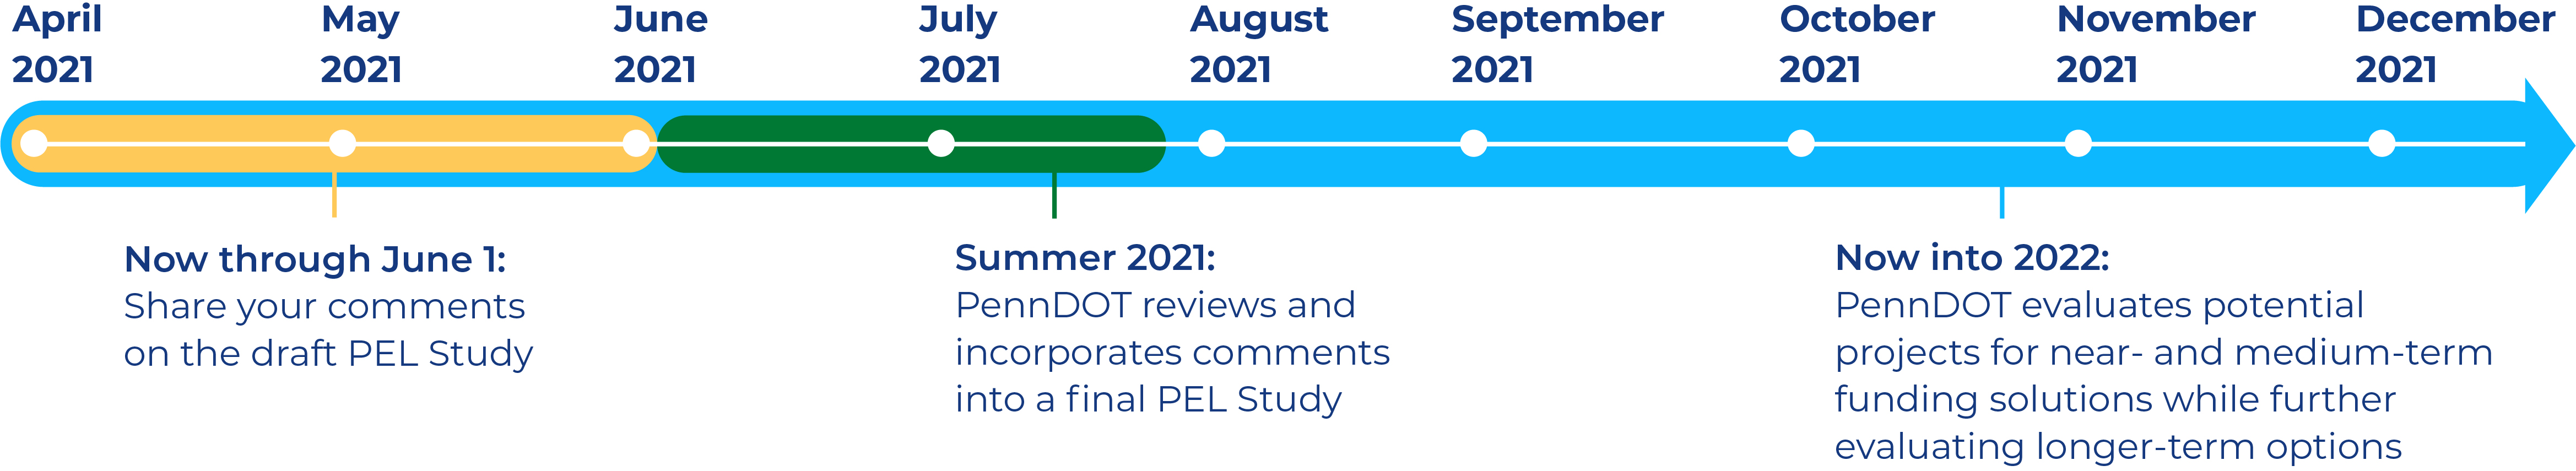 Now through June 1: Share your comments on the draft PEL study. Summer 2021: (June-August) PennDOT reviews and incorporates comments into a final PEL Study. Now into 2022: PennDOT evaluates potential projects for near- and medium-term funding solutions while further evaluating longer-term options.